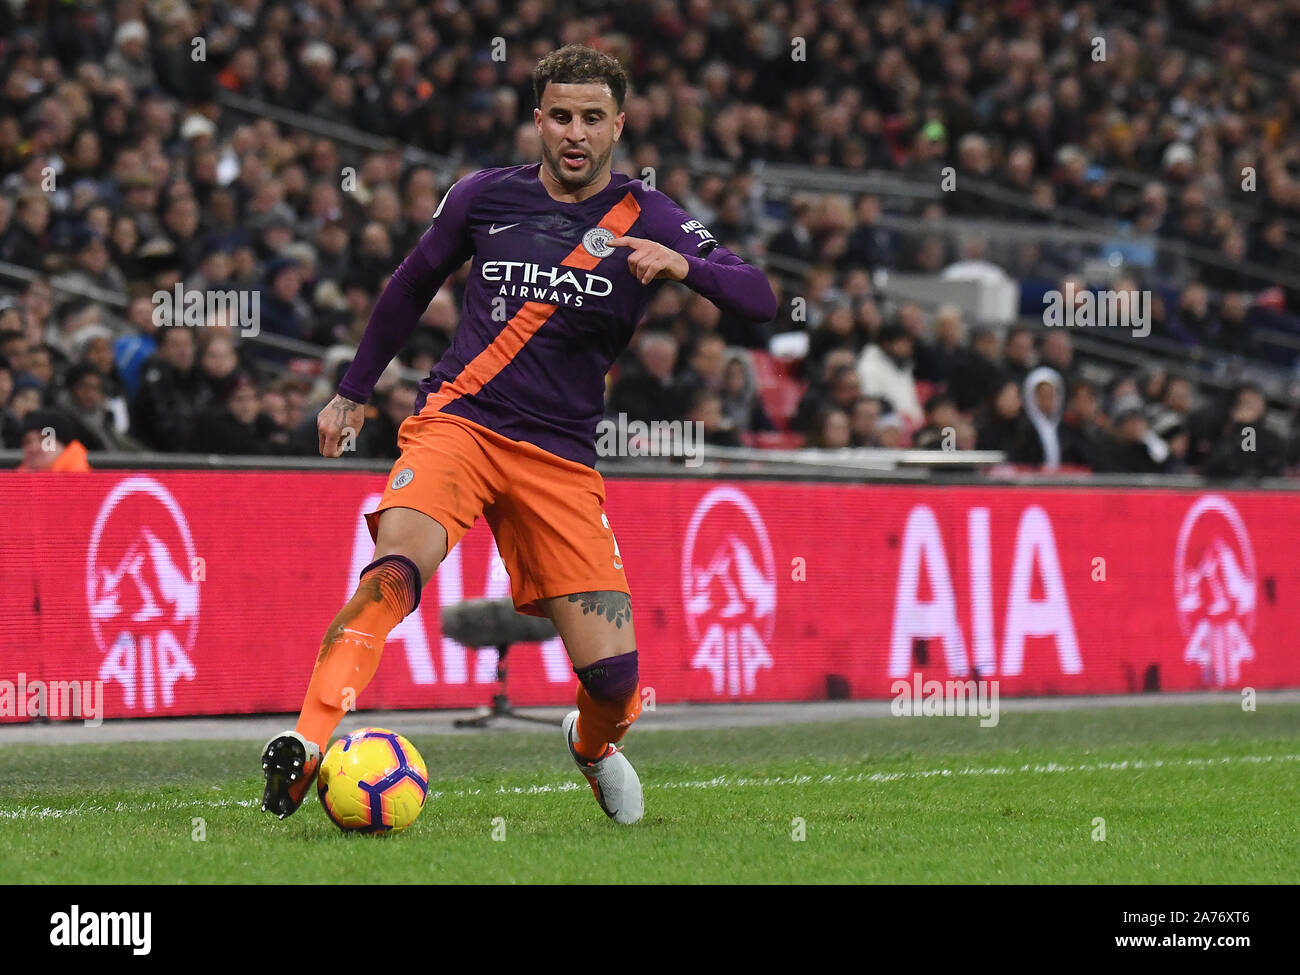 LONDON, ENGLAND - OCTOBER 29, 2018: Kyle Walker of City  pictured during the 2018/19 English Premier League game between Tottenham Hotspur and Manchester City at Wembley Stadium. Stock Photo